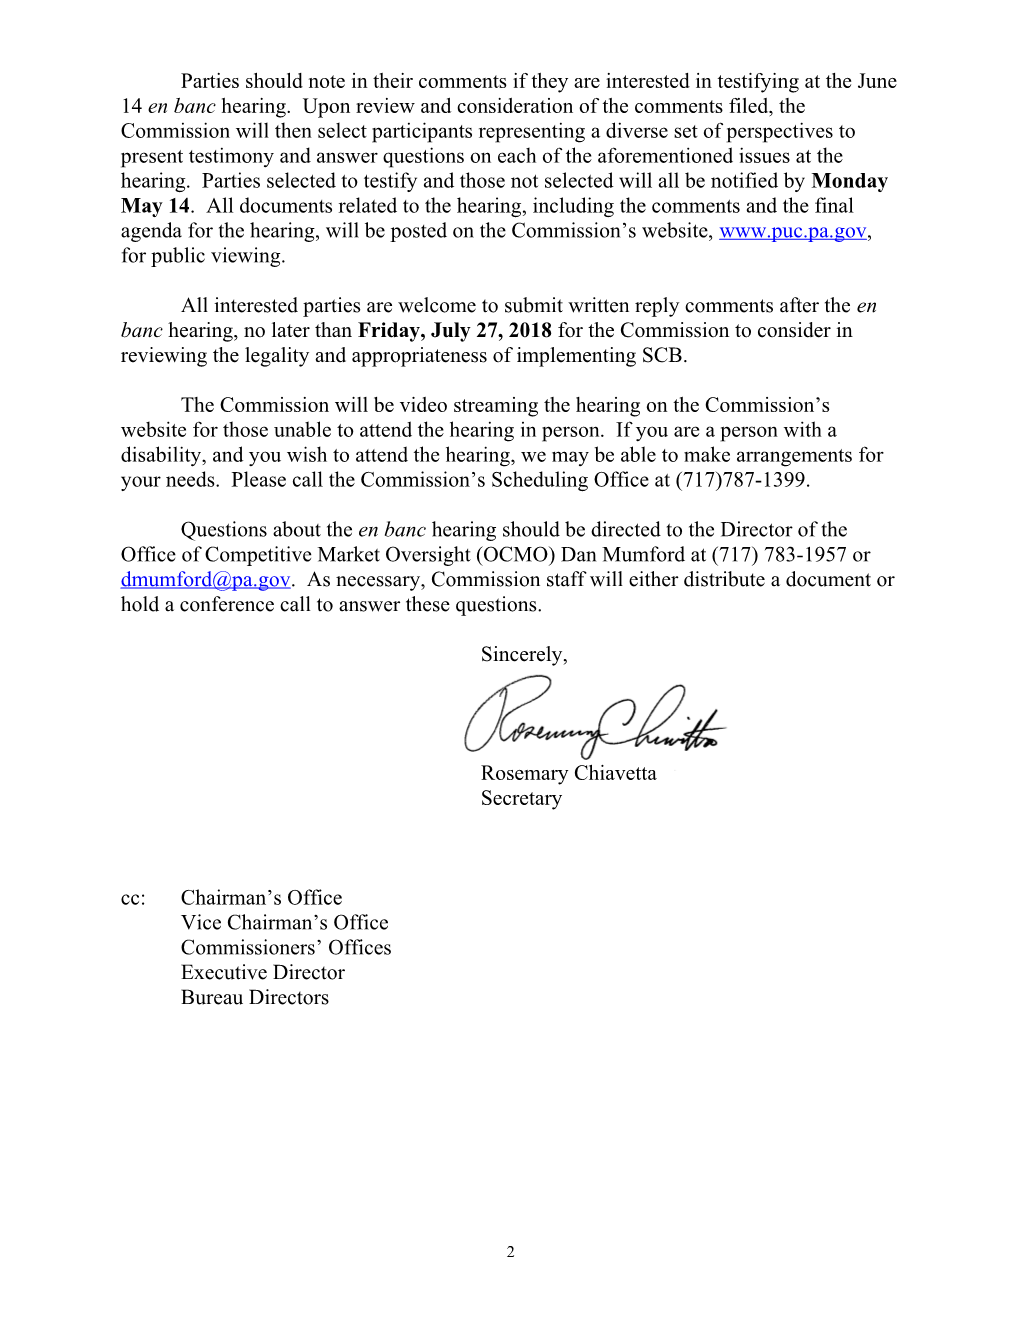 Re:Notice of En Banc Hearing on Implementation of Supplier Consolidated Billing